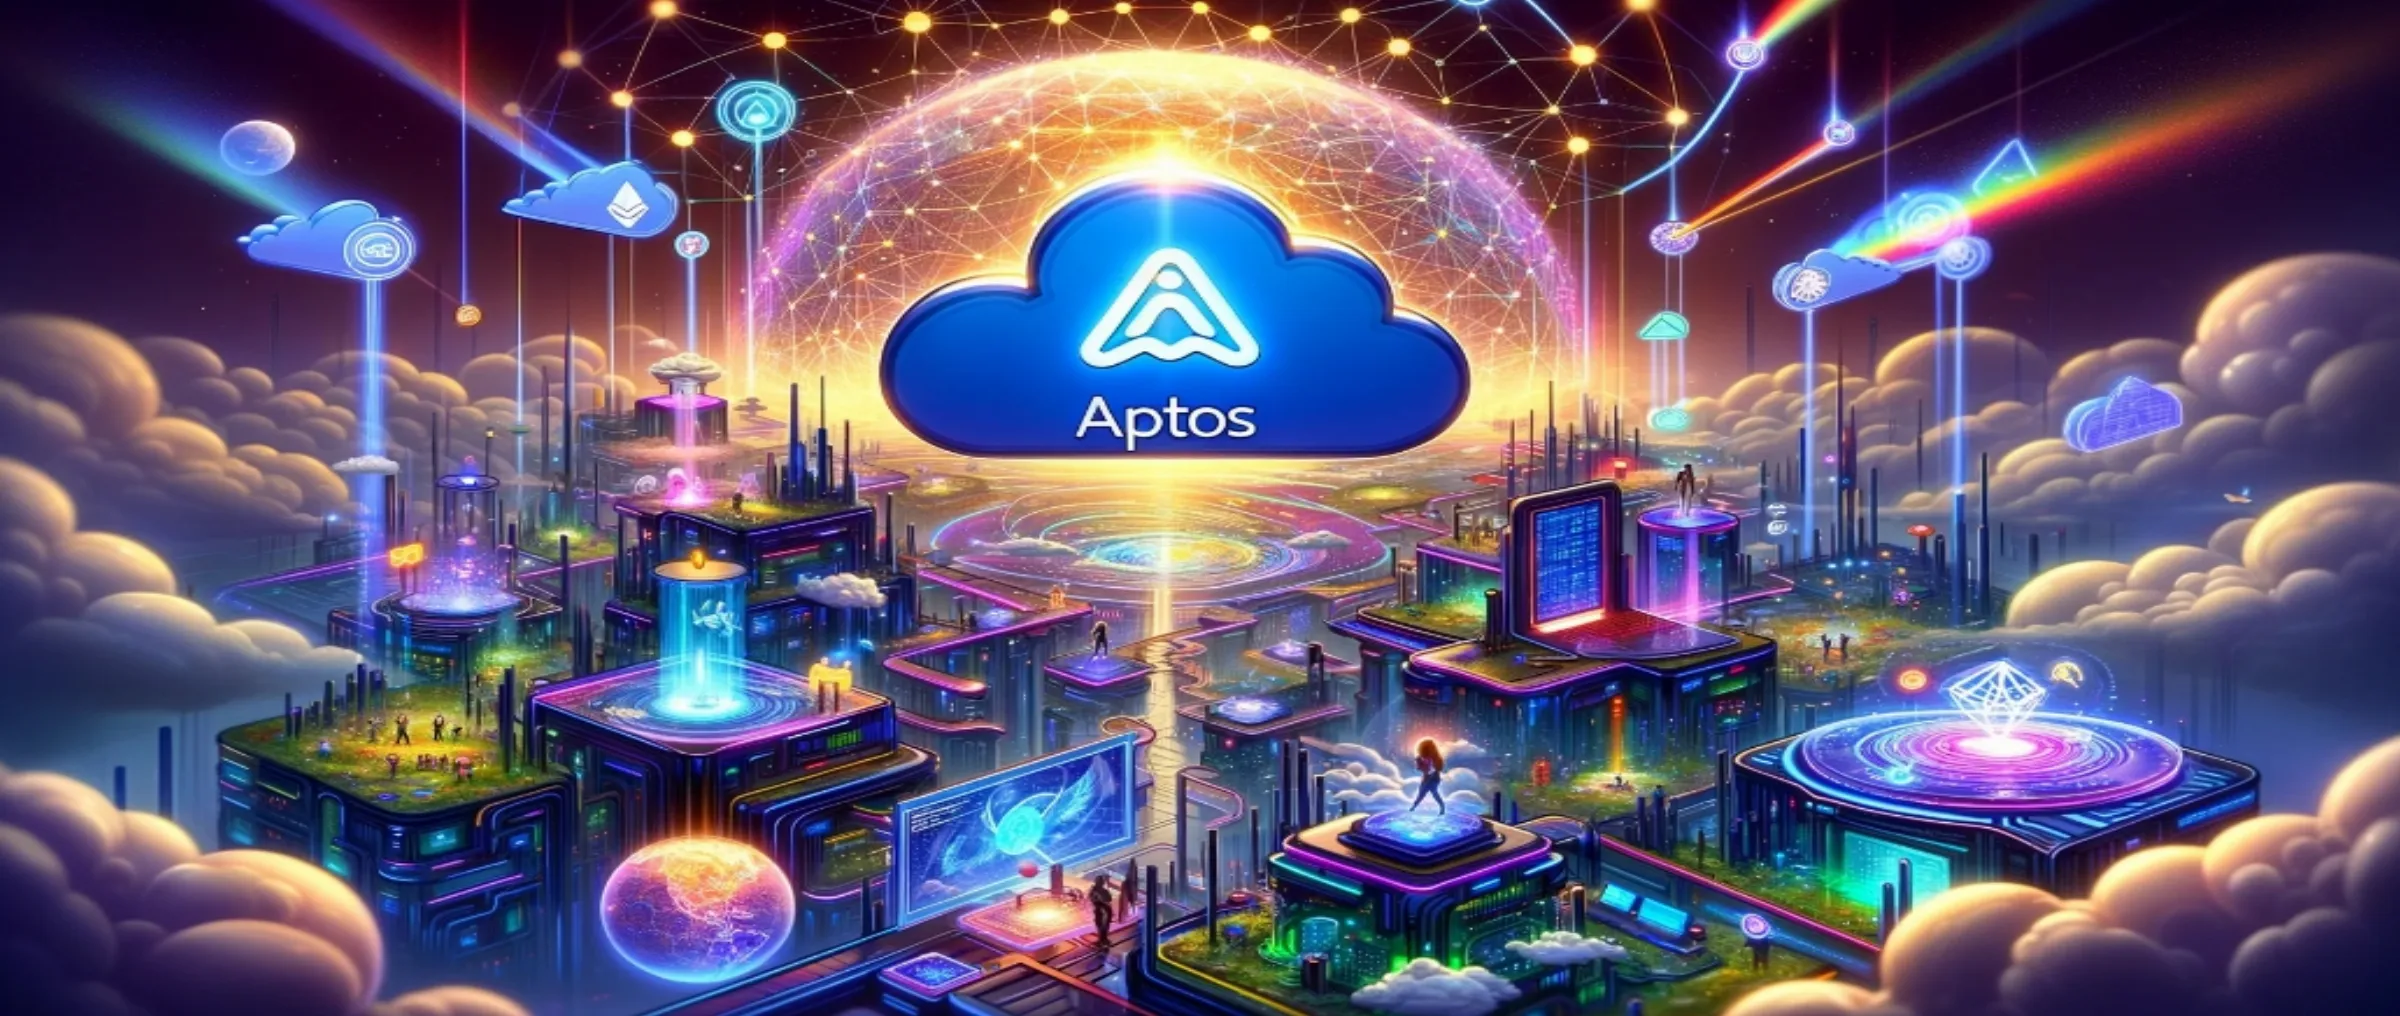 Aptos uses Google Cloud to improve the quality of games in Web3